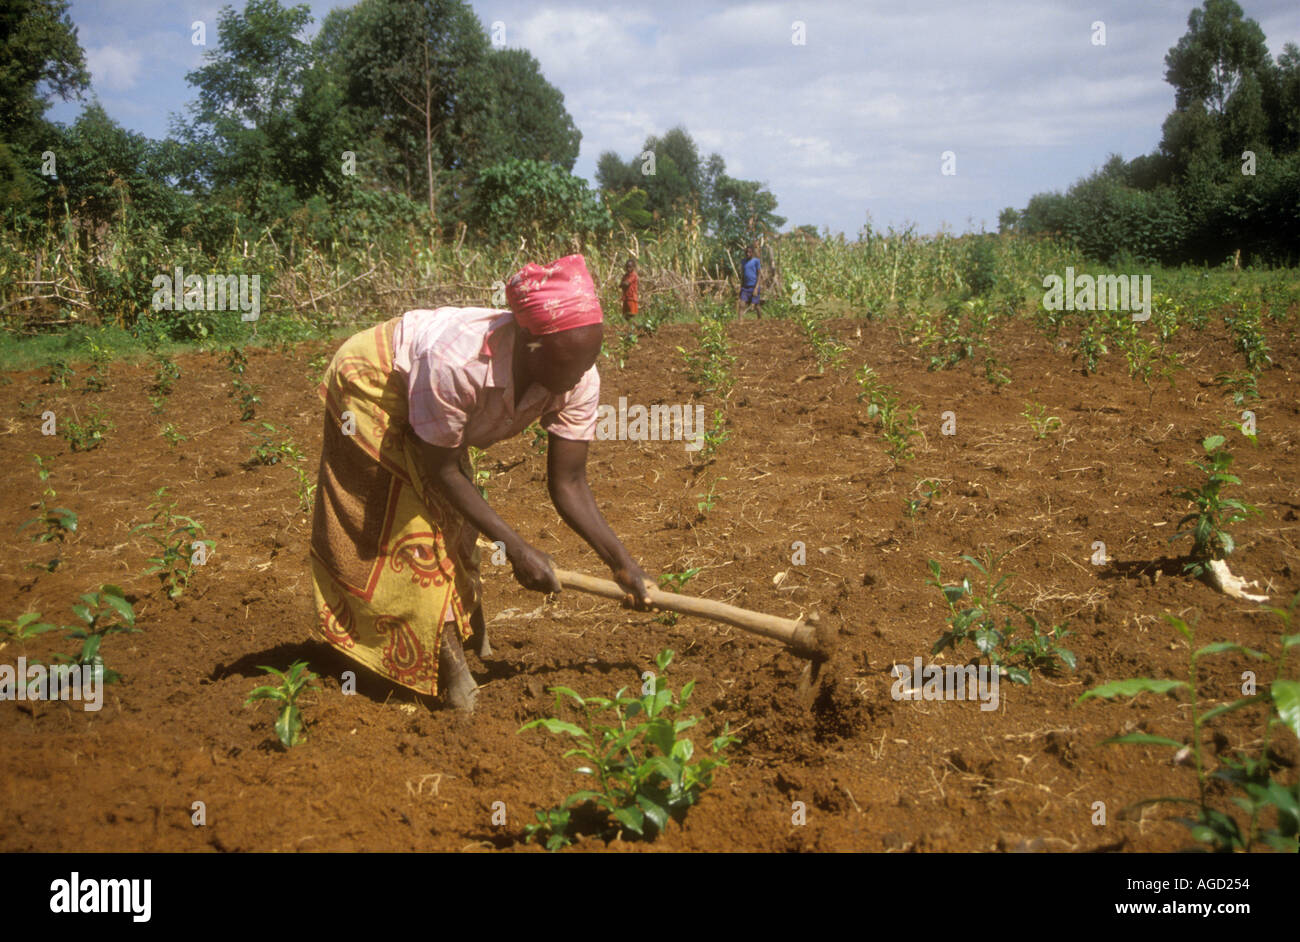 Woman Tilling Field With Hand Tool Kenya Stock Photo 1102419 Alamy